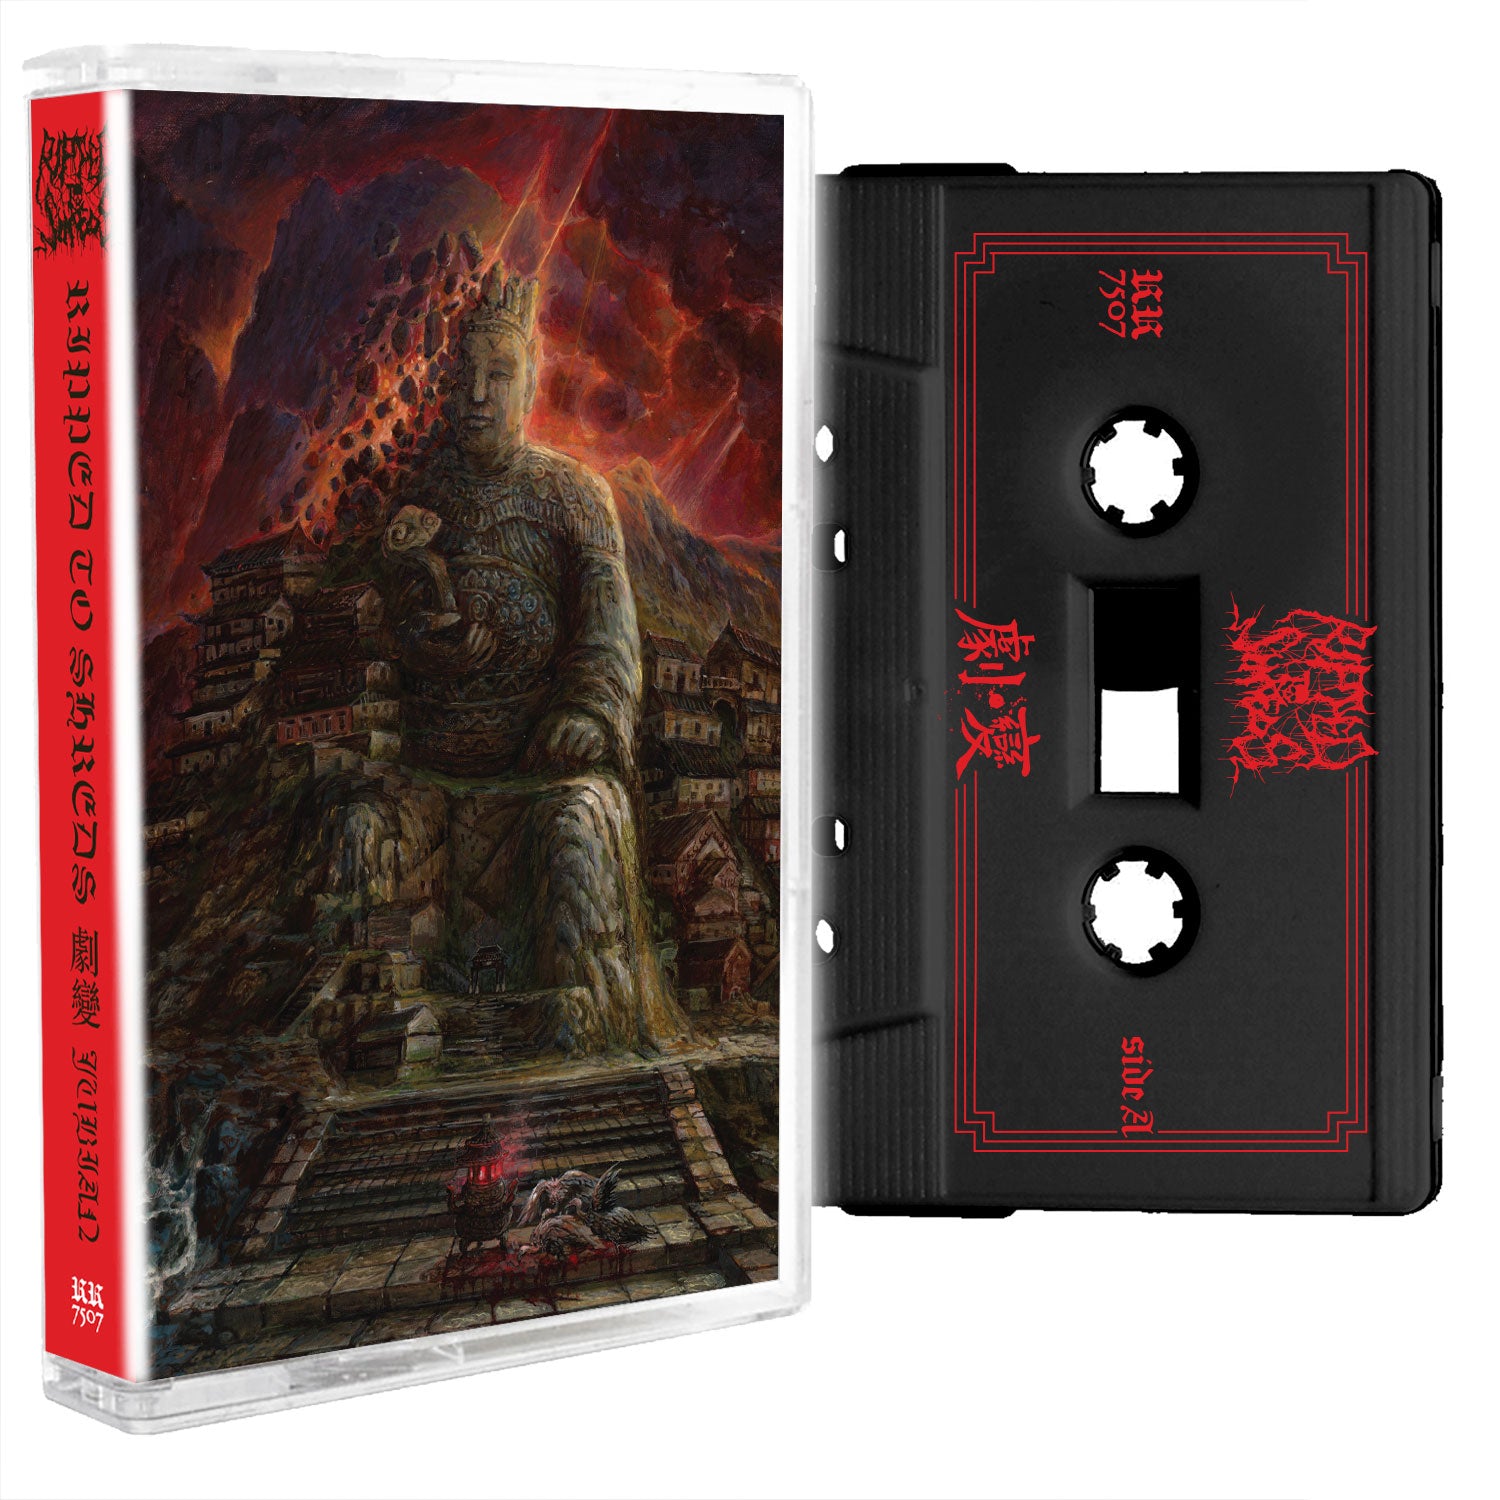 Ripped to Shreds "劇變 (Jubian)" Cassette